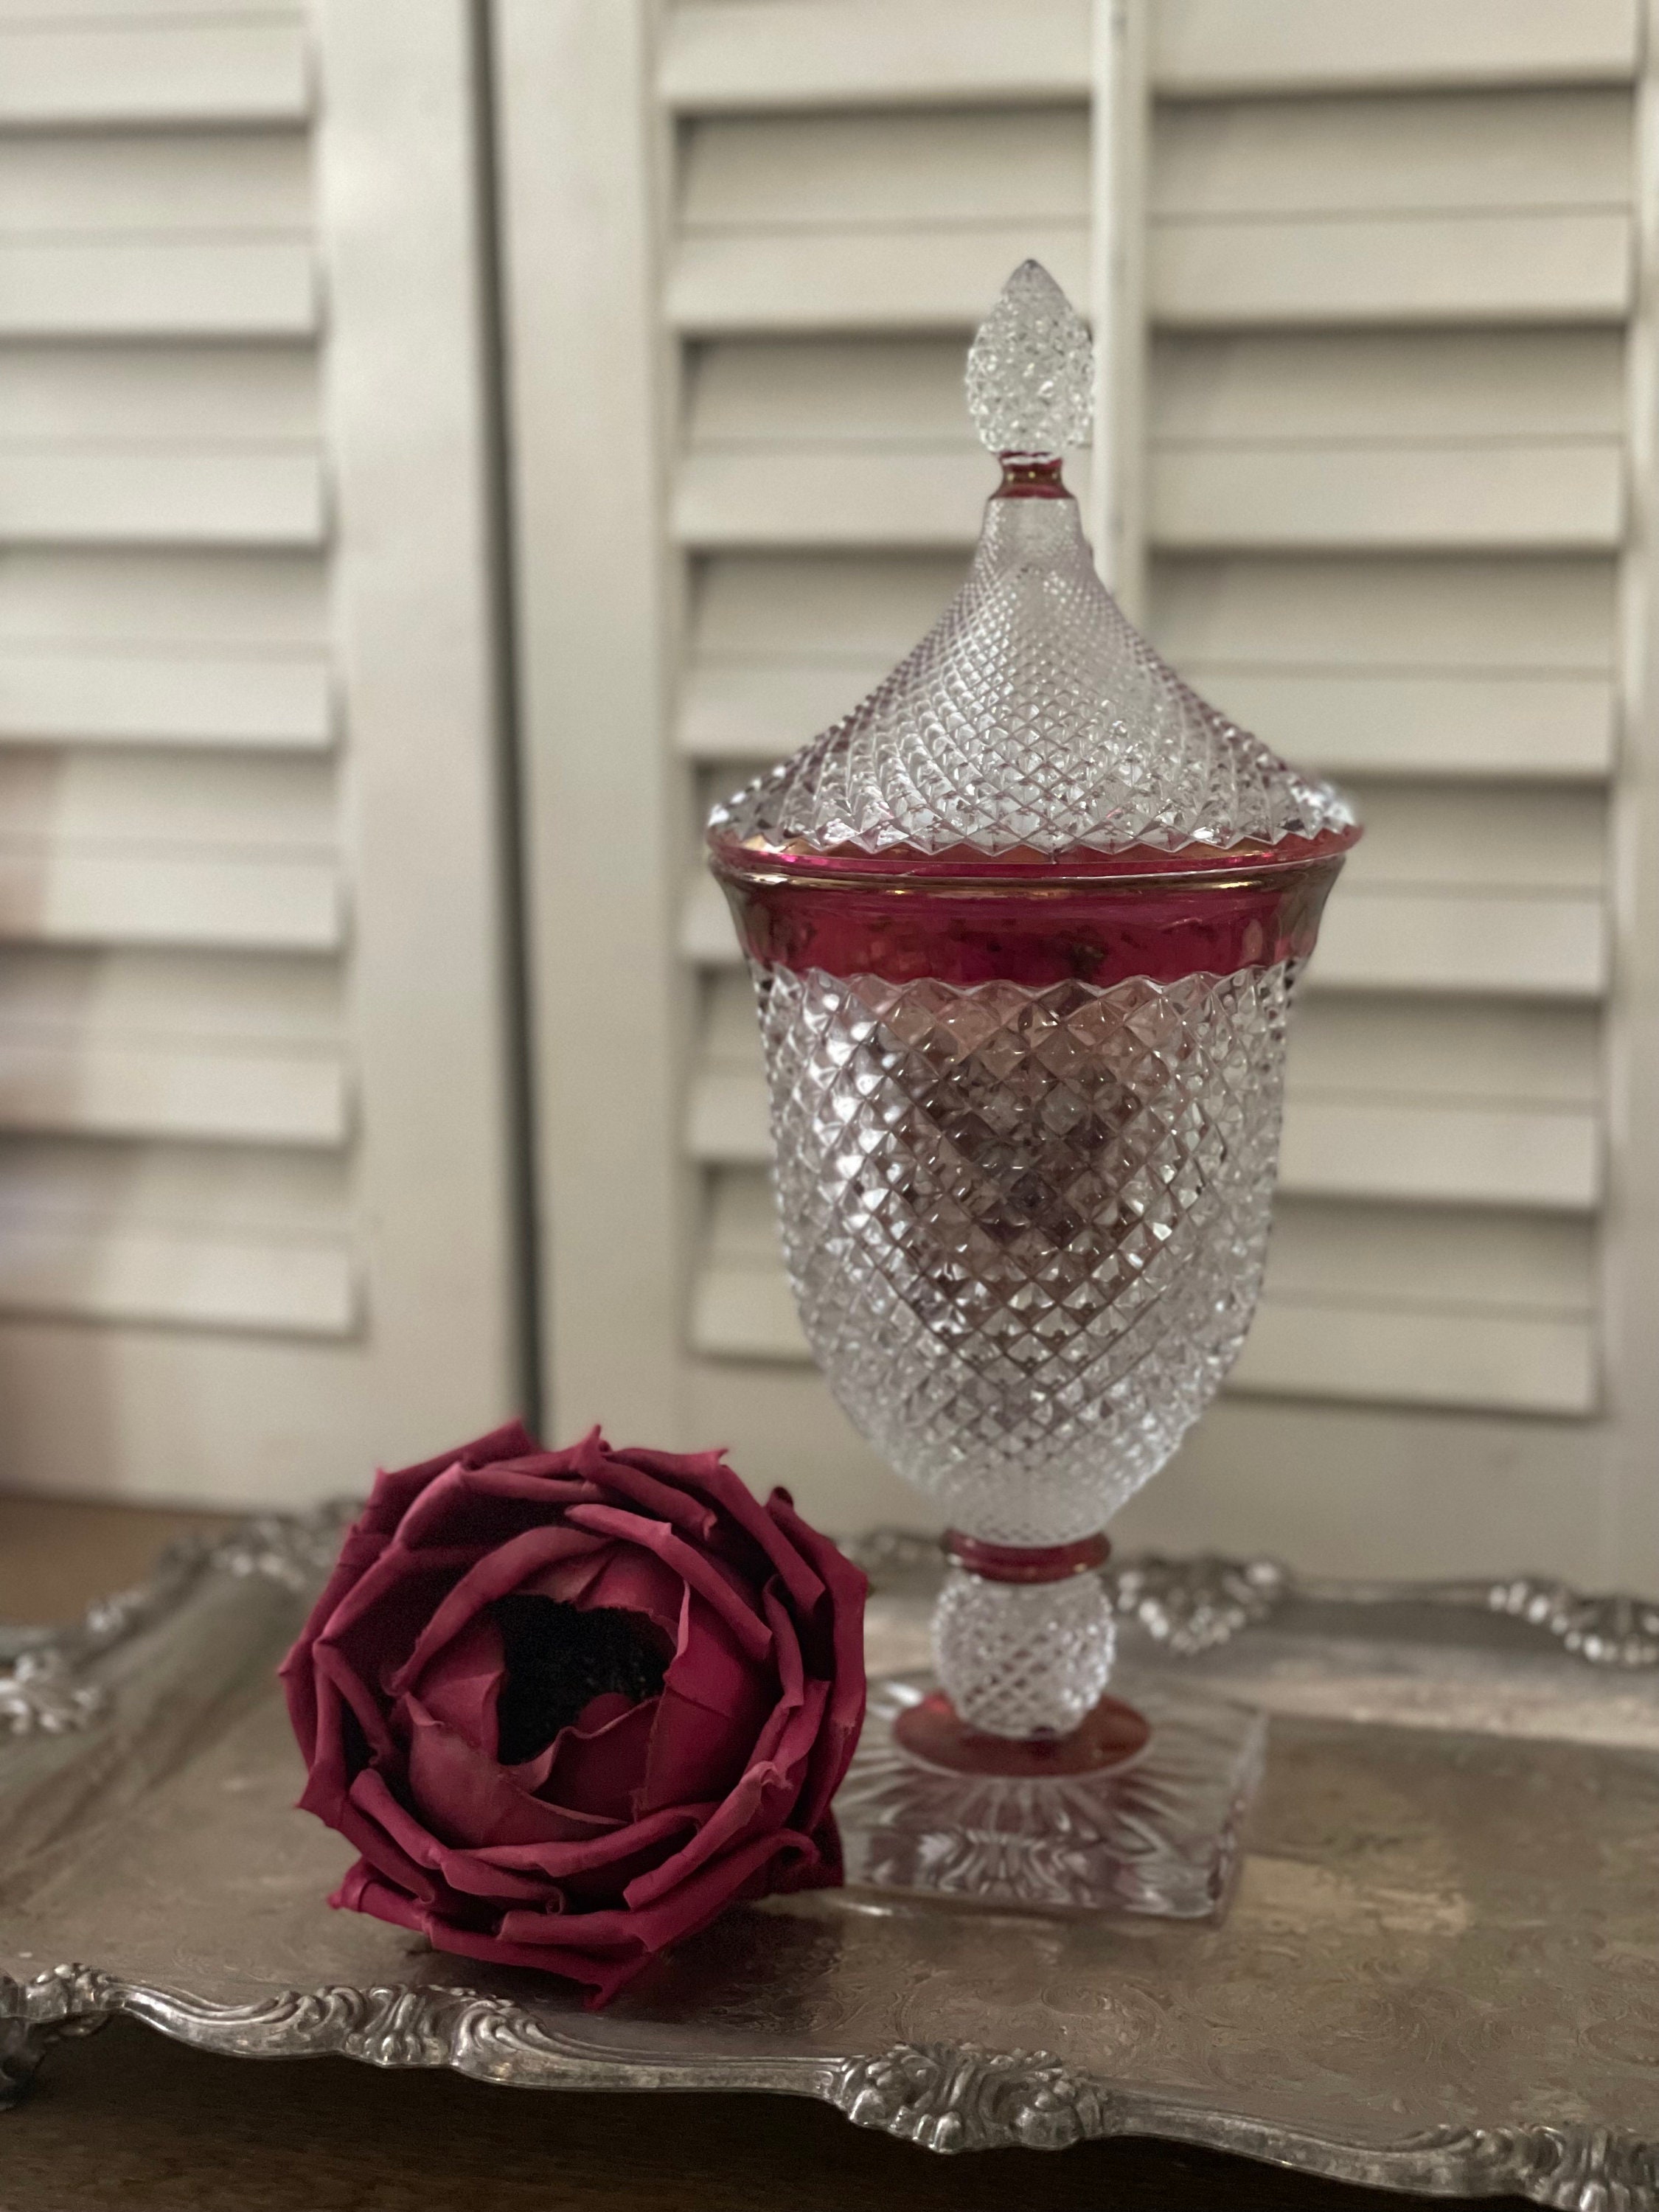 Roses Porcelain Eye Glass Holder with tray